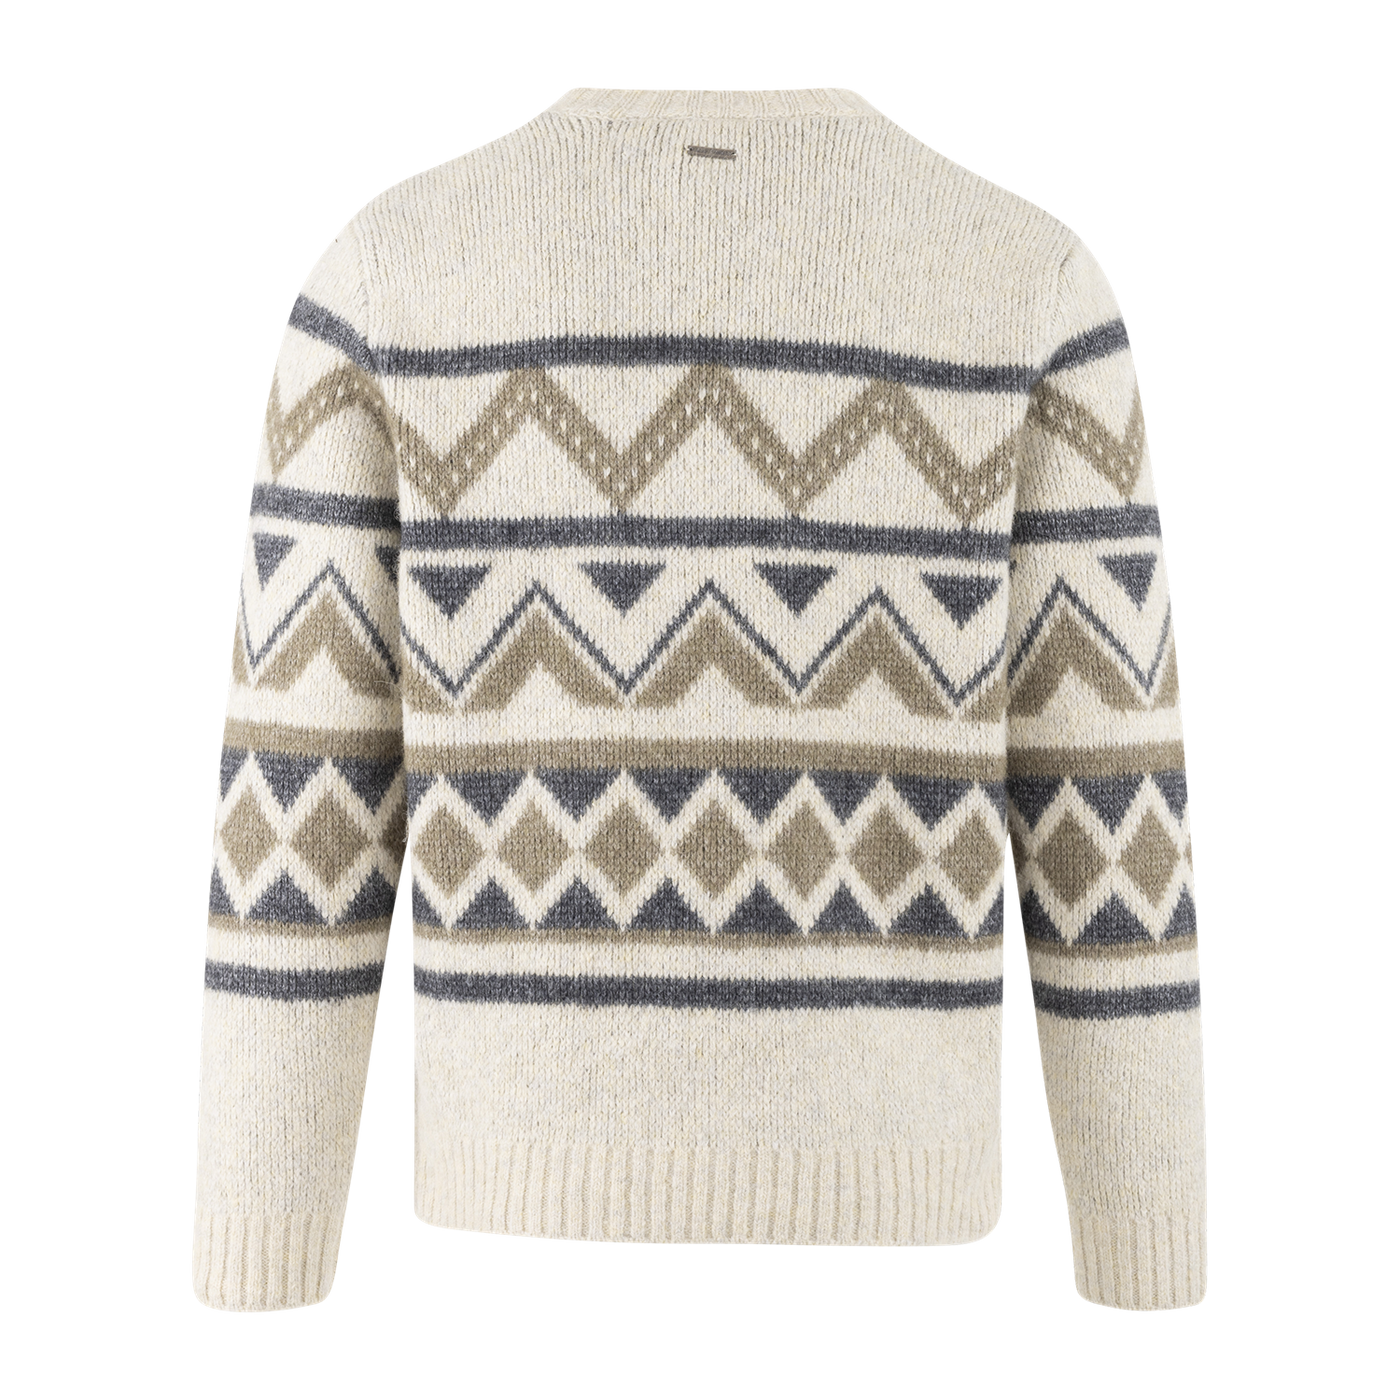 Clarence sweater